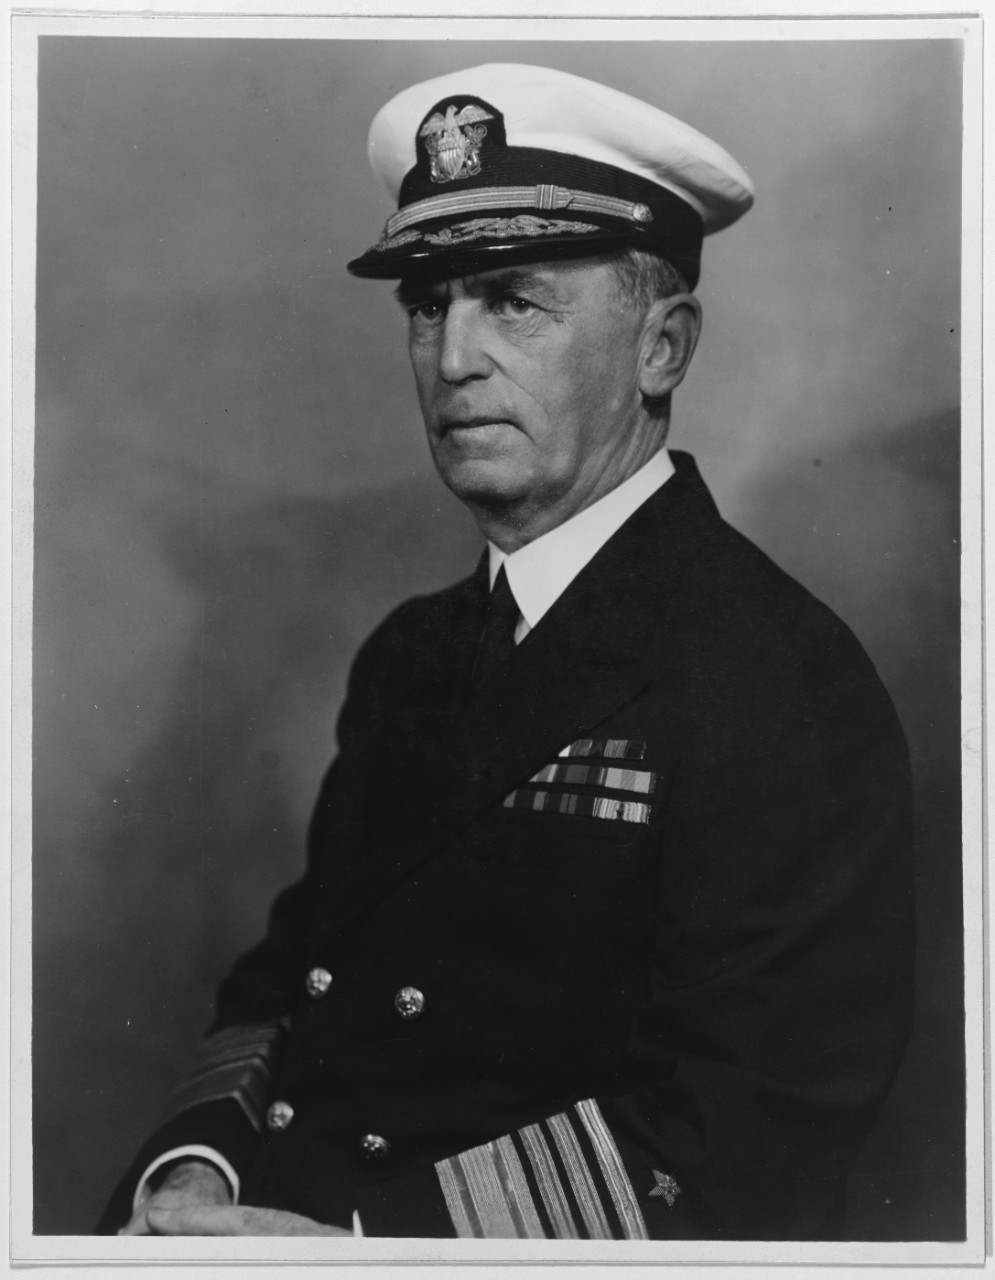 Photo #: NH 50873  Admiral William D. Leahy, USN, Chief of Naval Operations  